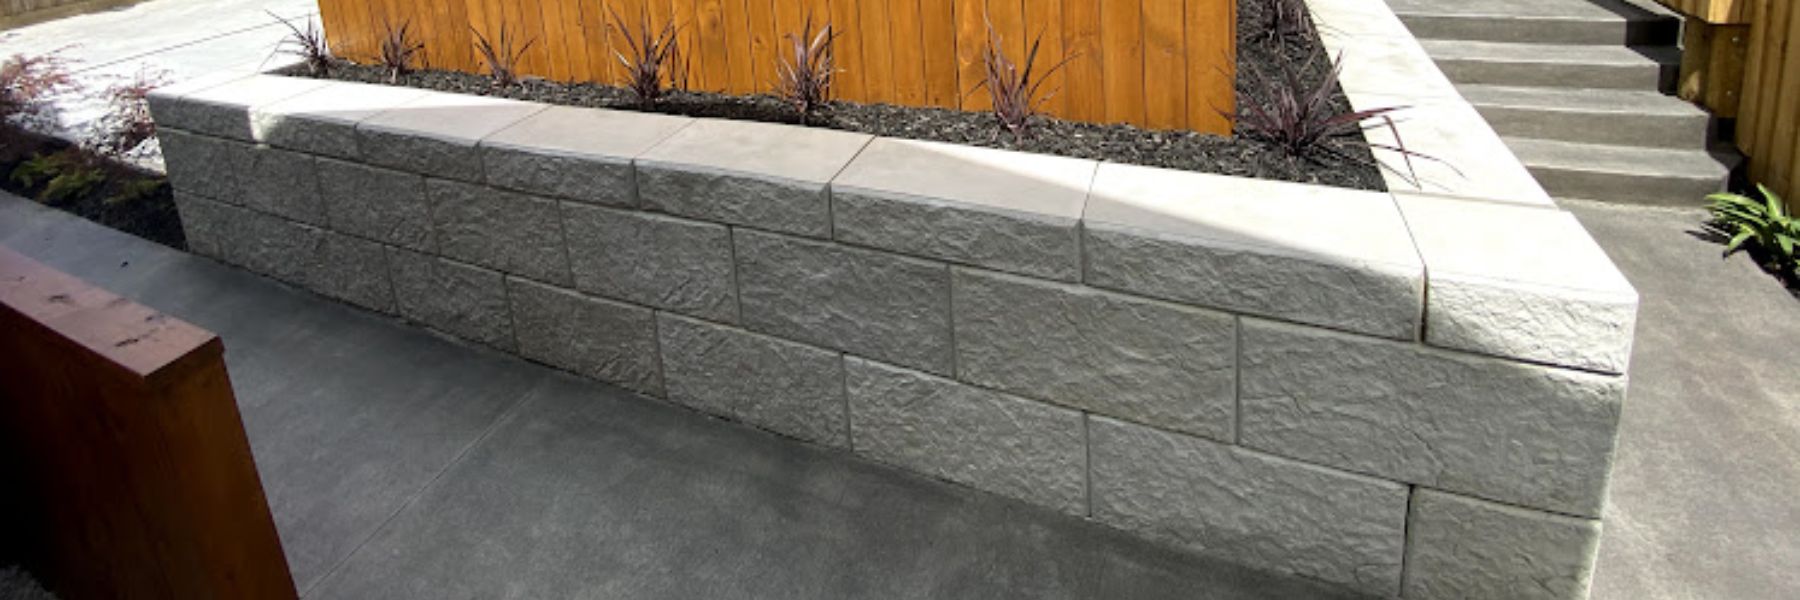 From Standalone to Terraced Housing - Stonebloc is The Retaining Wall Solution for New Zealand Homes